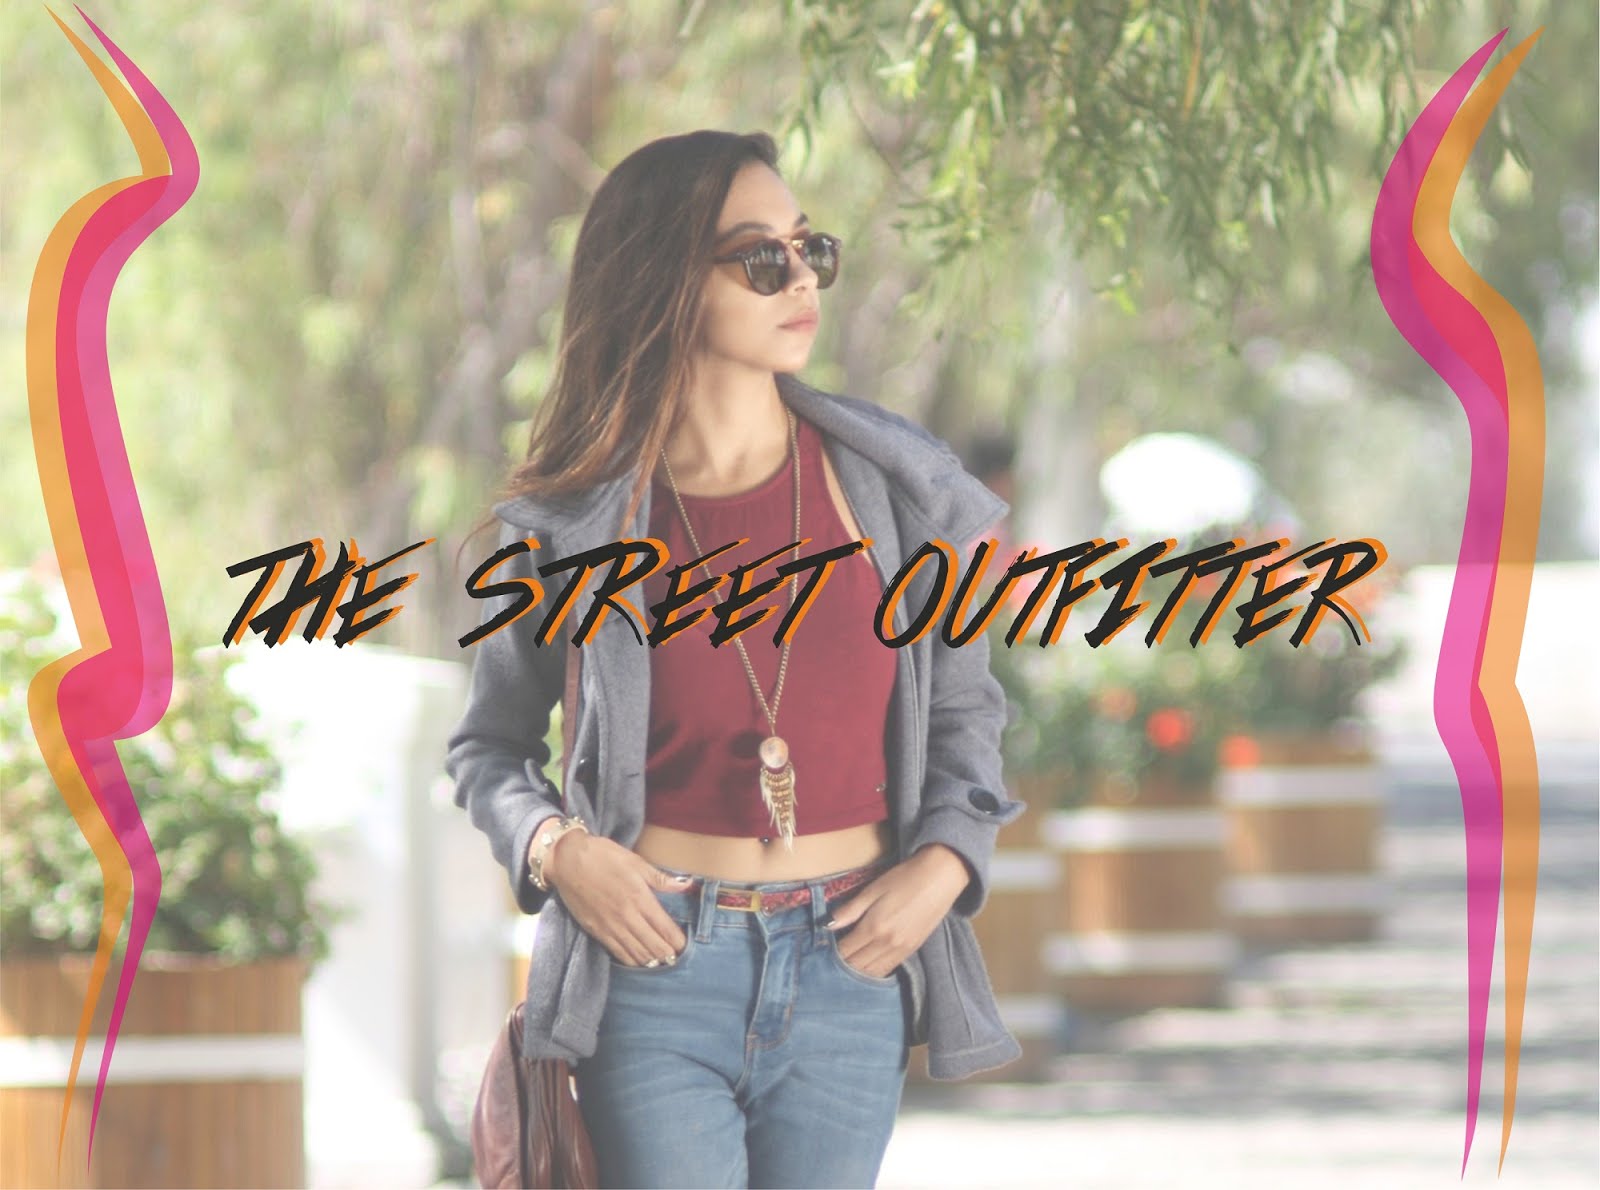 THE STREET OUTFITTER